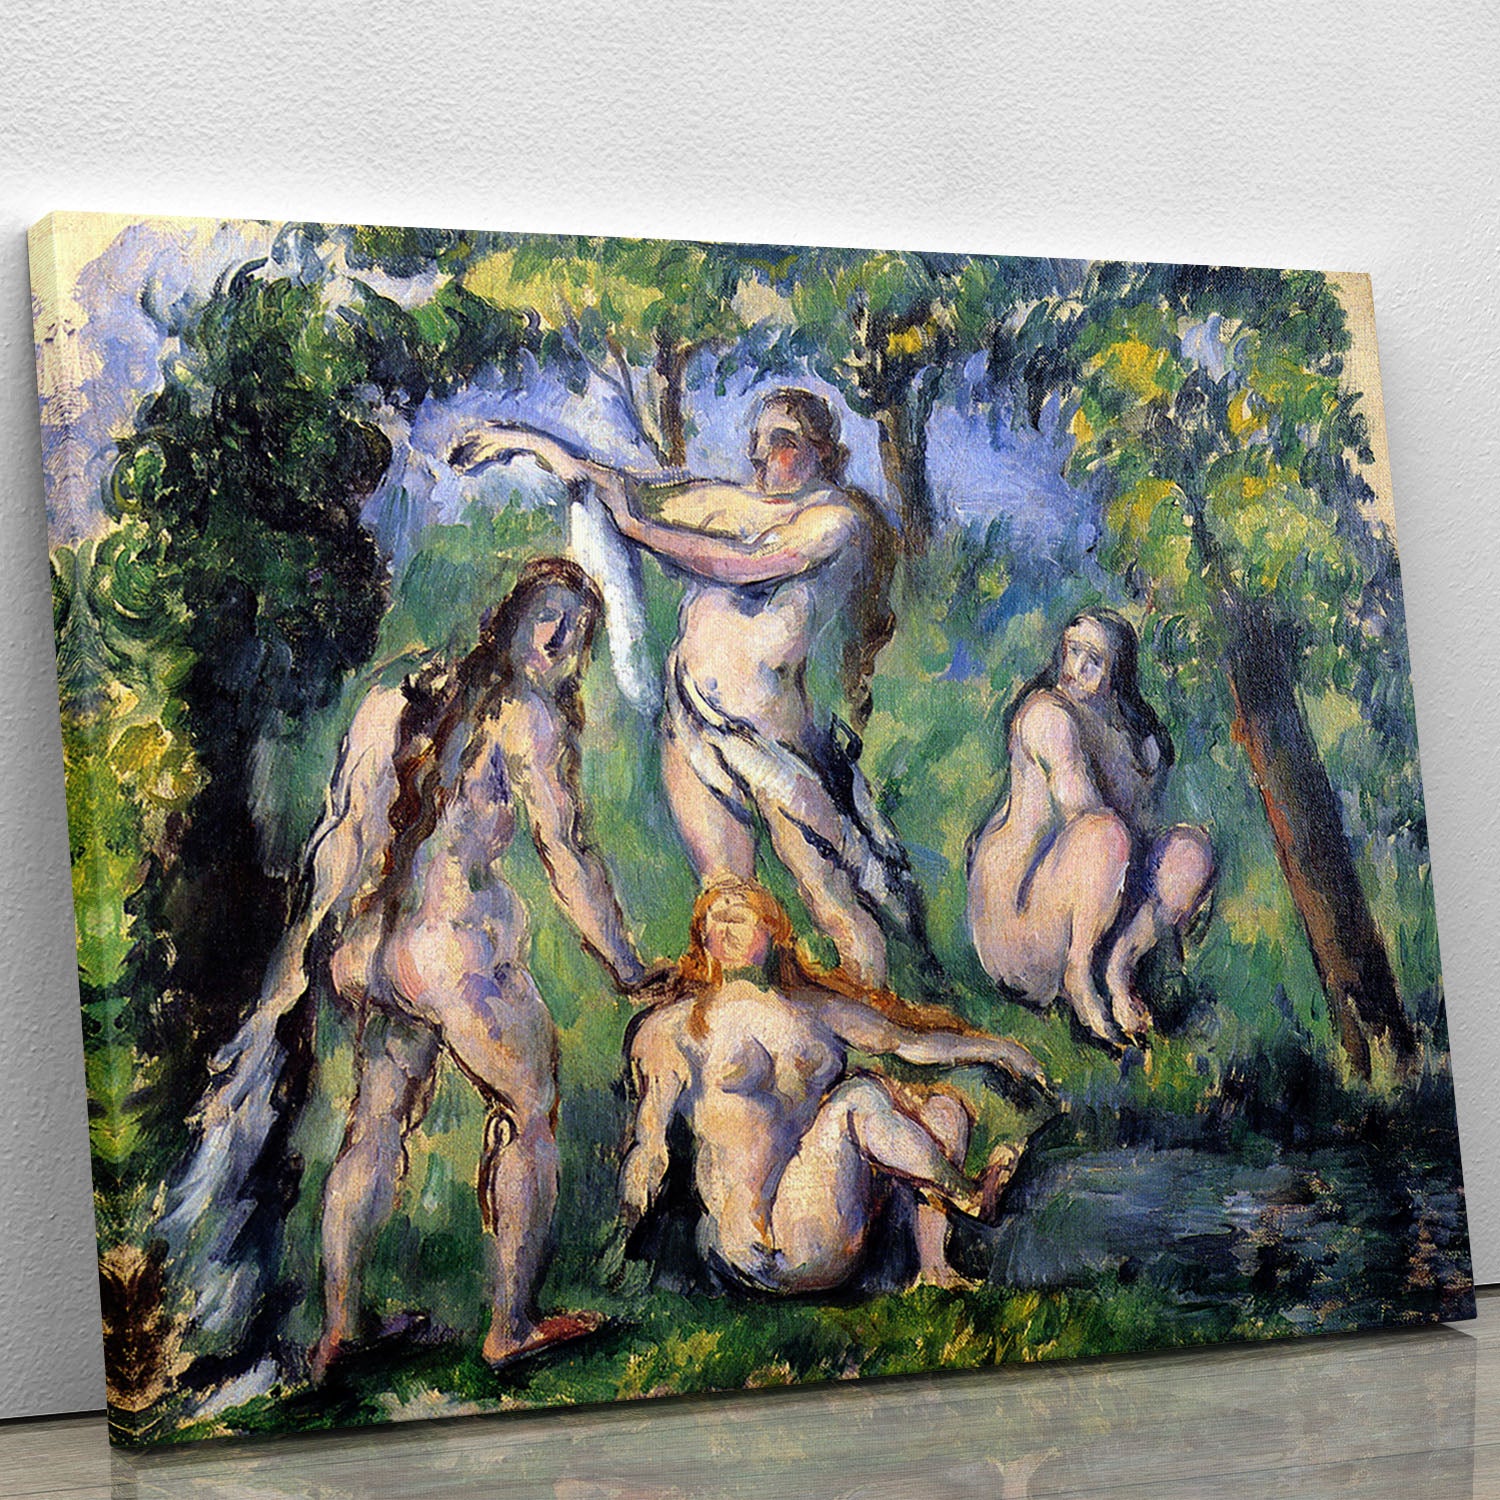 Bathers 2 by Cezanne Canvas Print or Poster - Canvas Art Rocks - 1